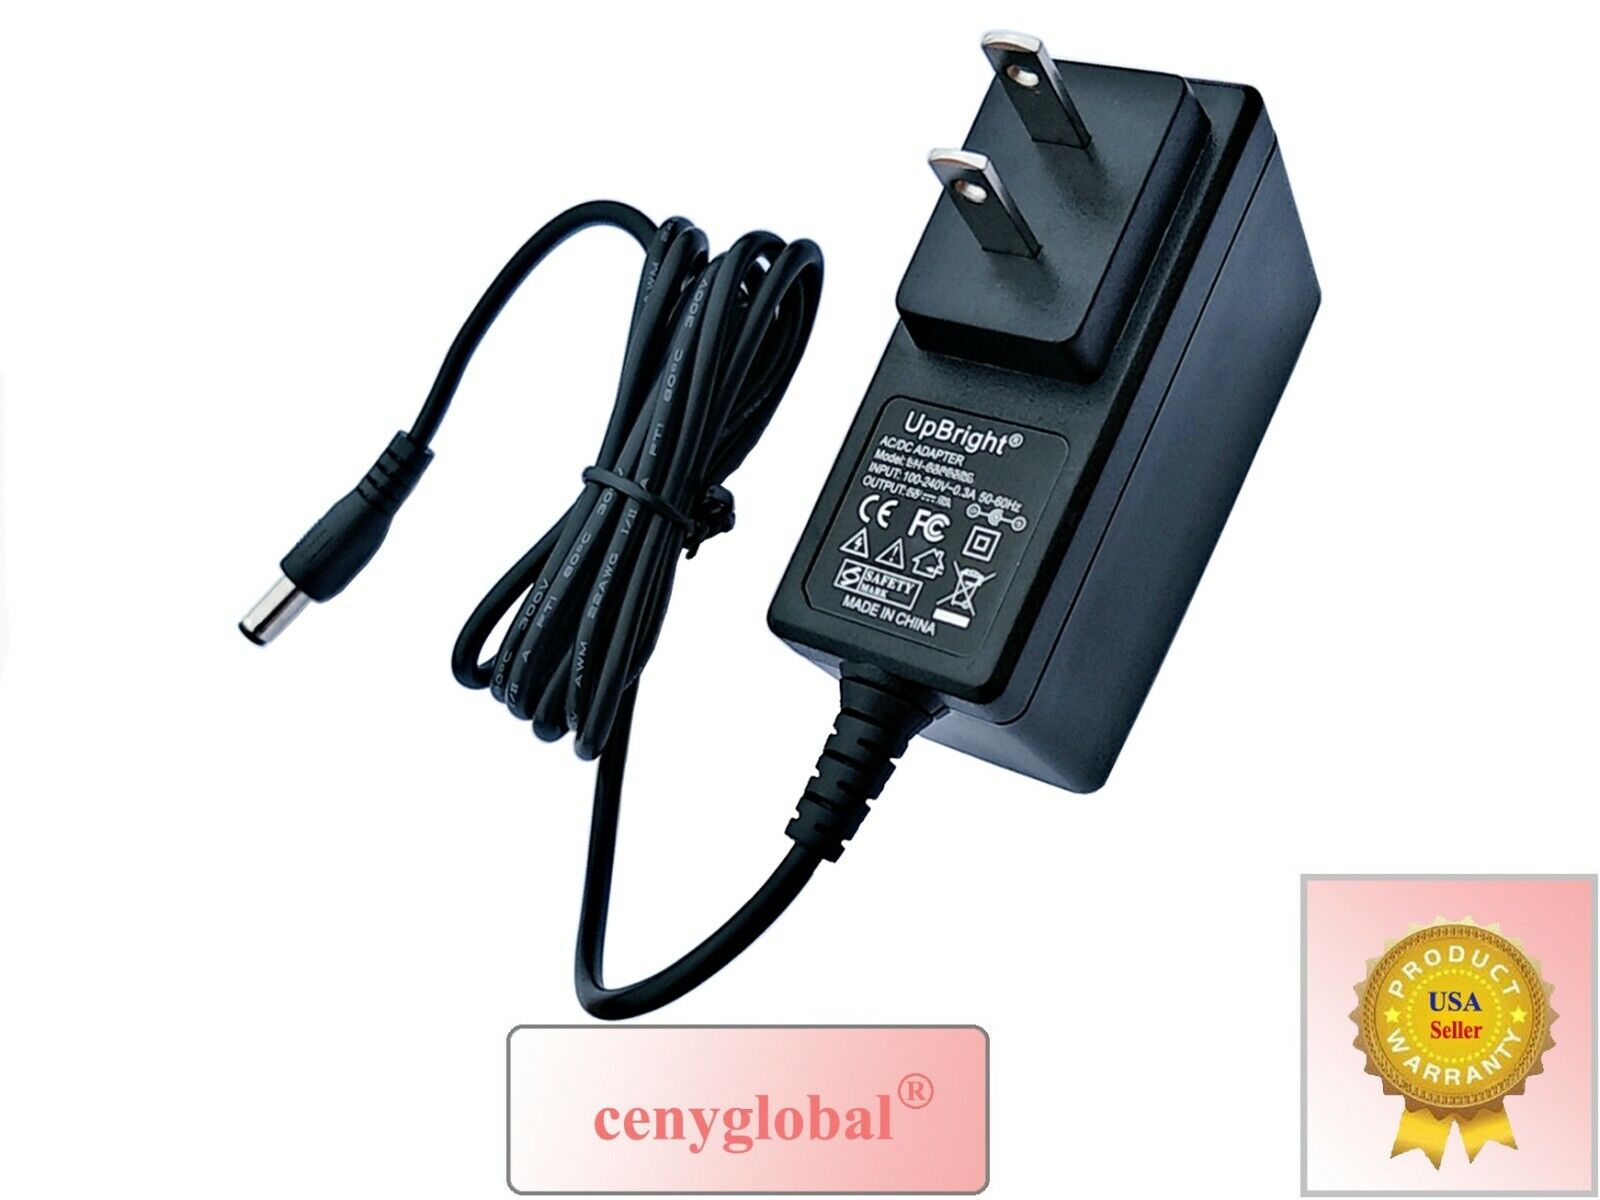 AC Adapter For Cisco Systems Small Business Gigabit Dual WAN VPN Router Series 